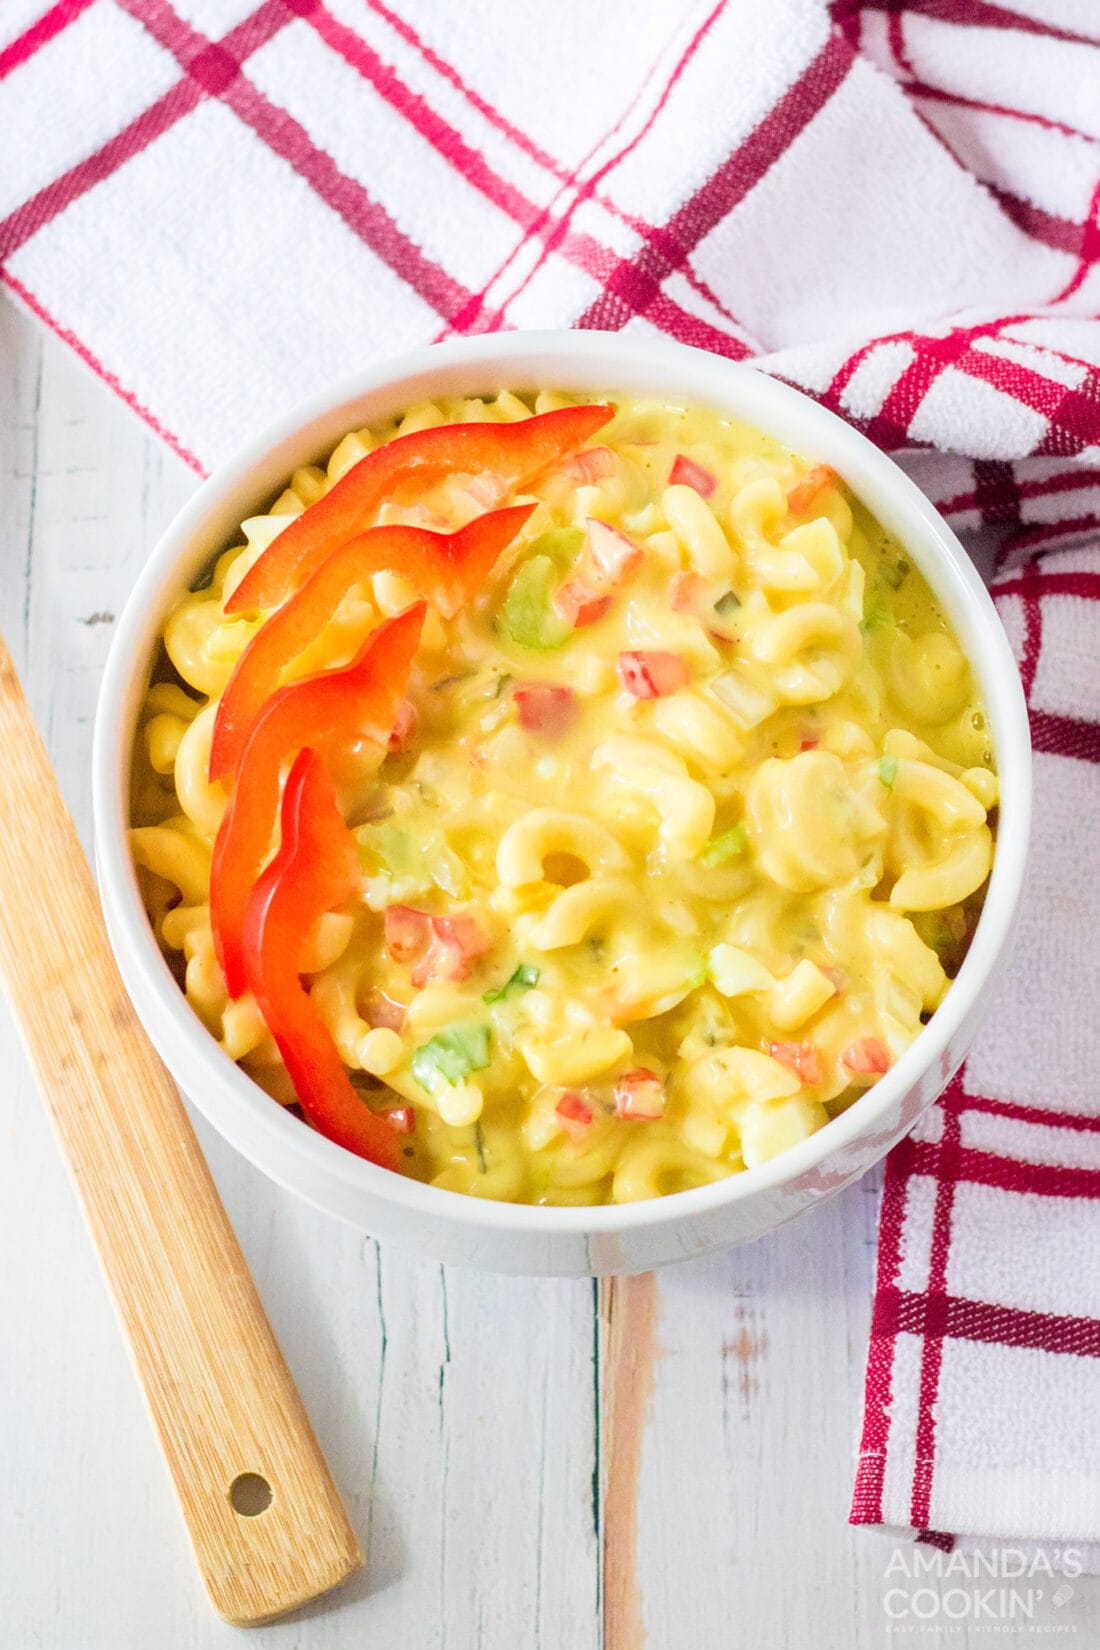 small bowl of Amish Macaroni Salad garnished with red bell pepper